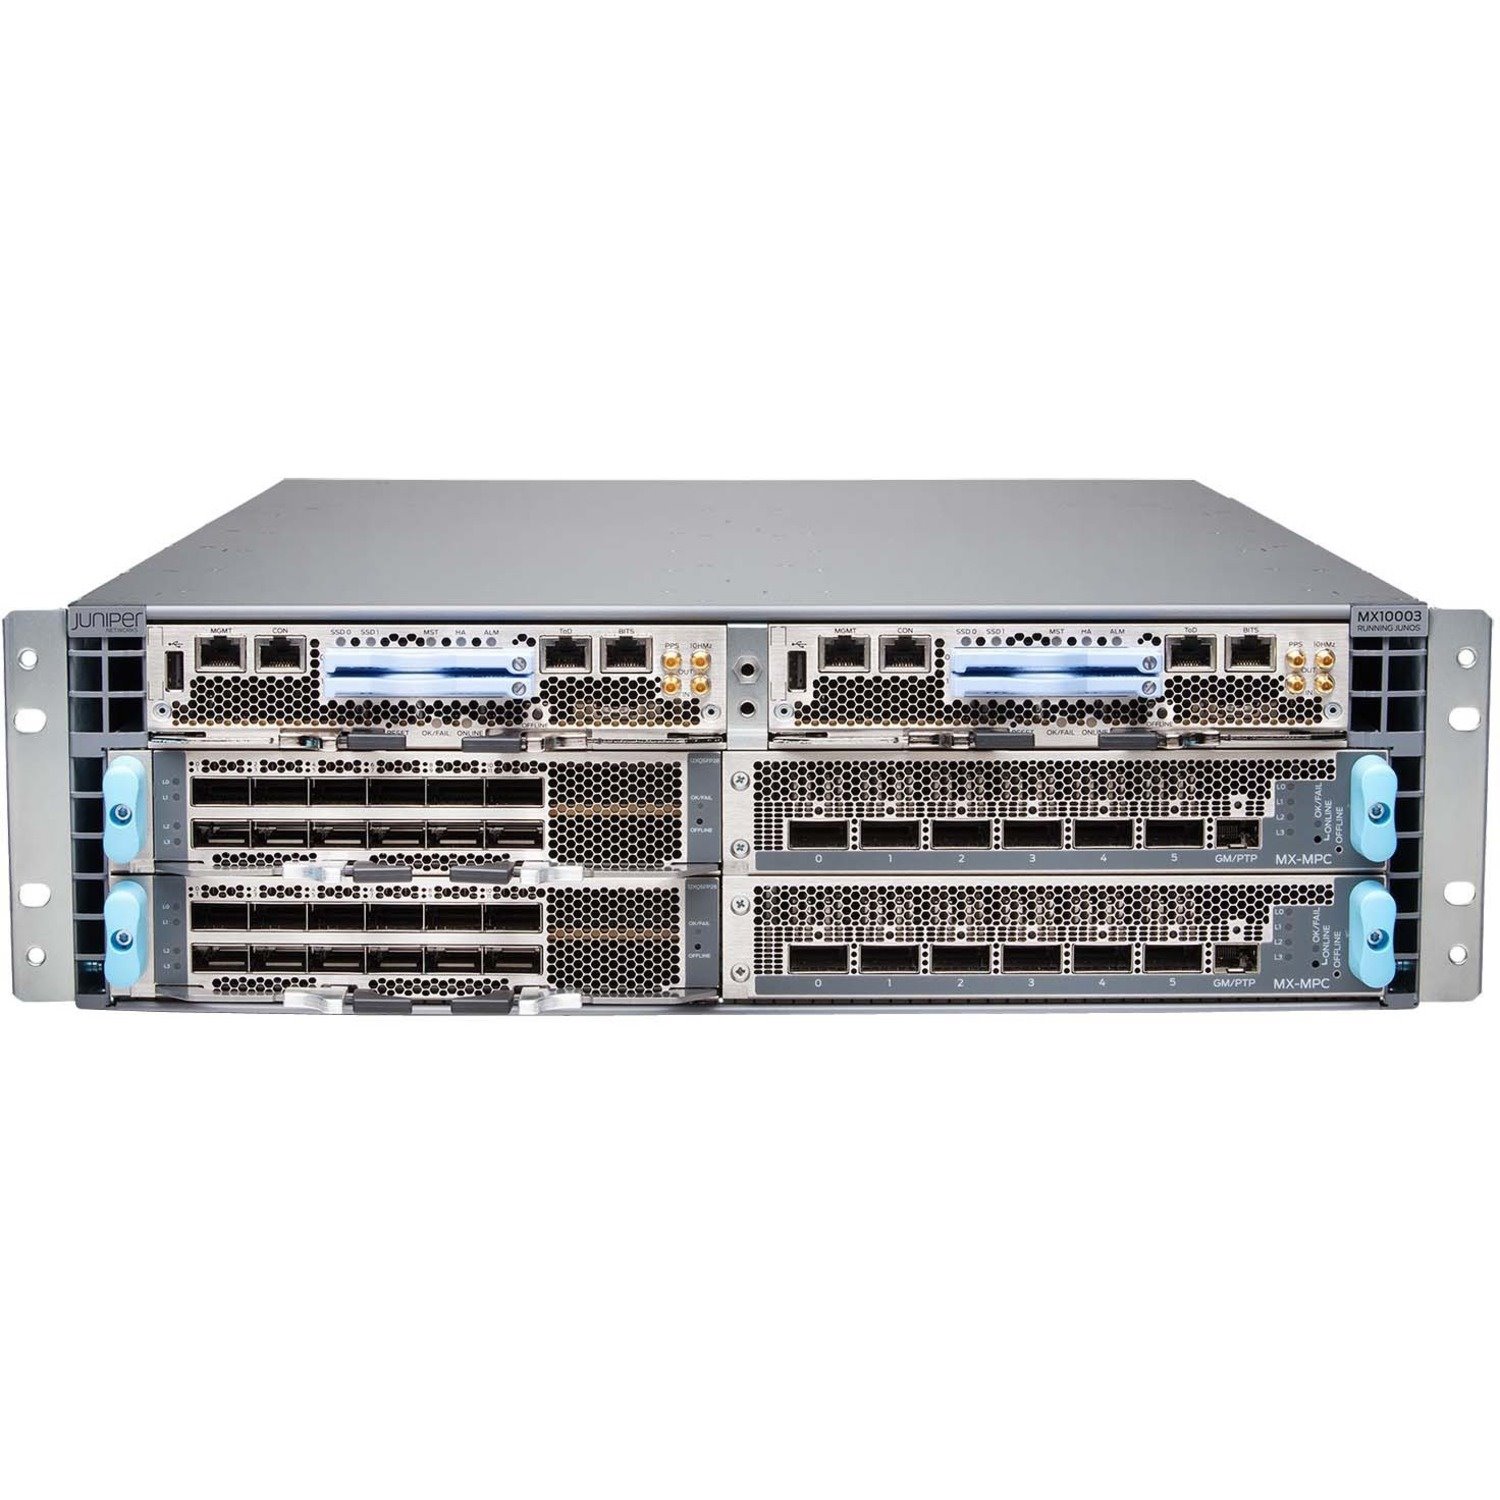 Juniper MX10003 Router Chassis